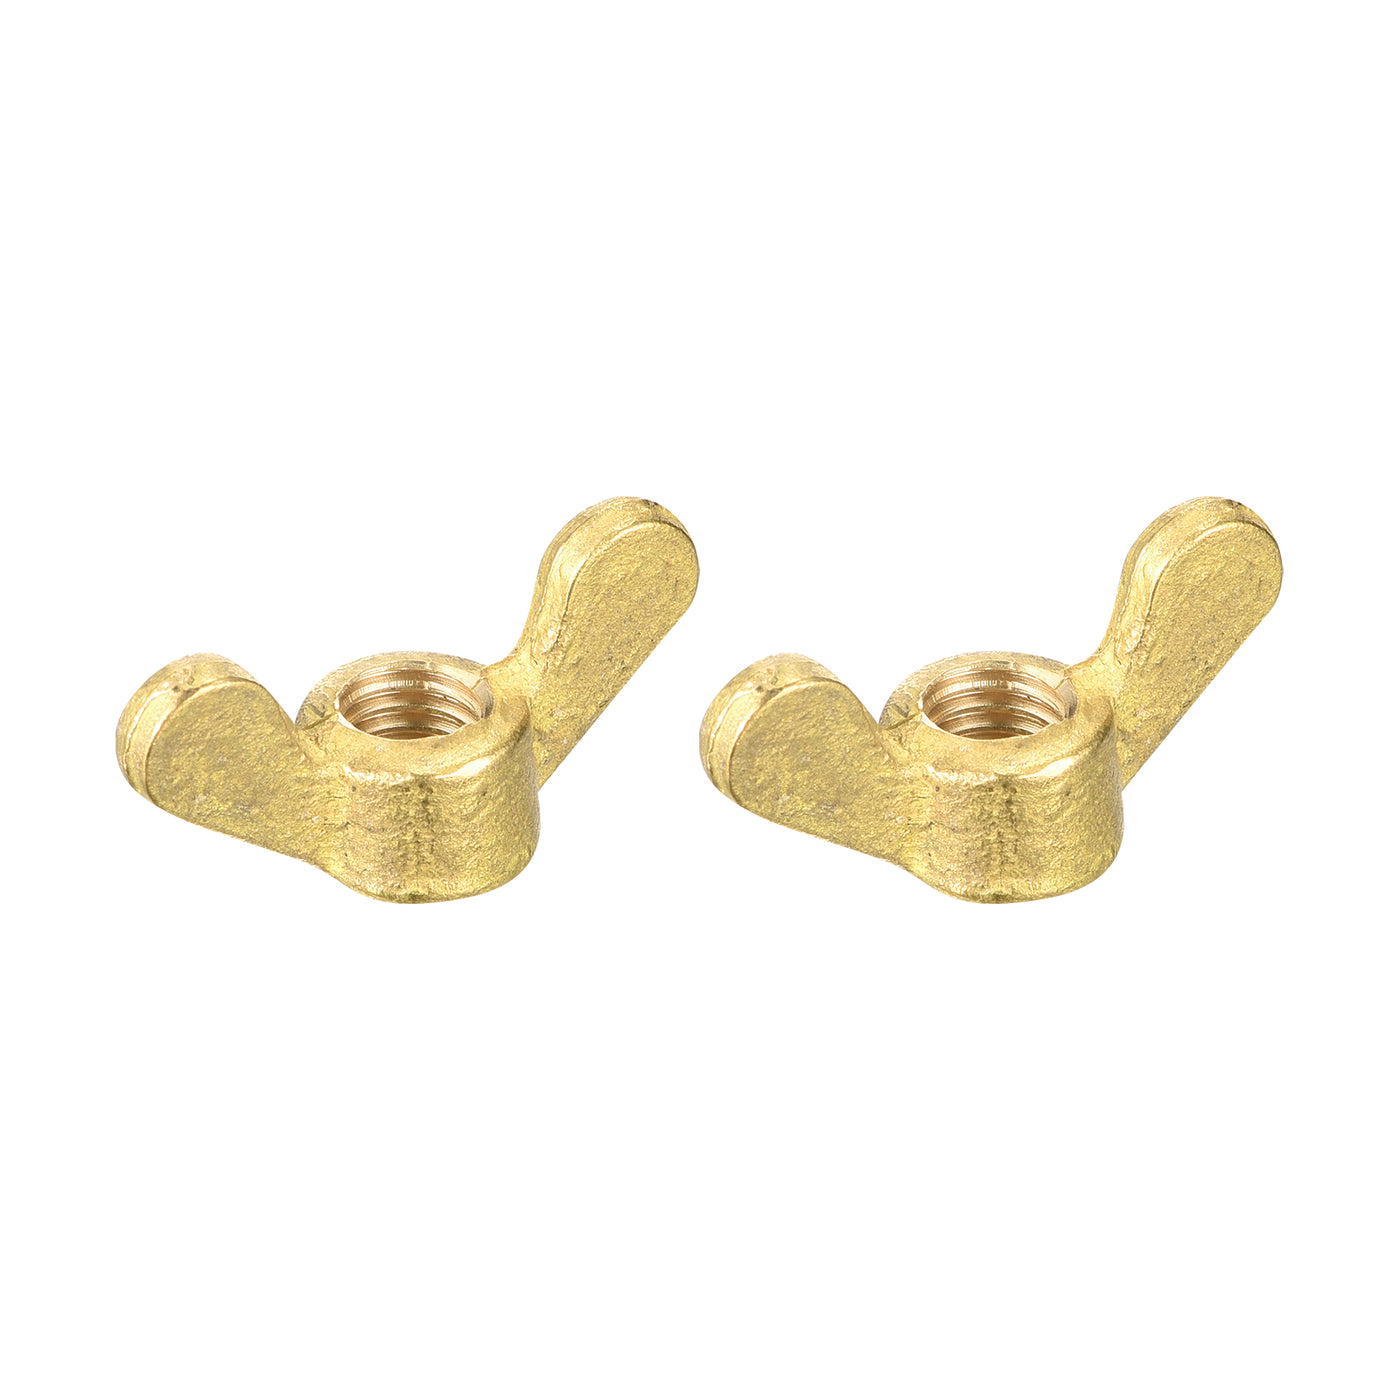 uxcell Uxcell Brass Wing Nuts, M8 Butterfly Nut Hand Twist Tighten Fasteners for Furniture, Machinery, Electronic Equipment, 2Pcs